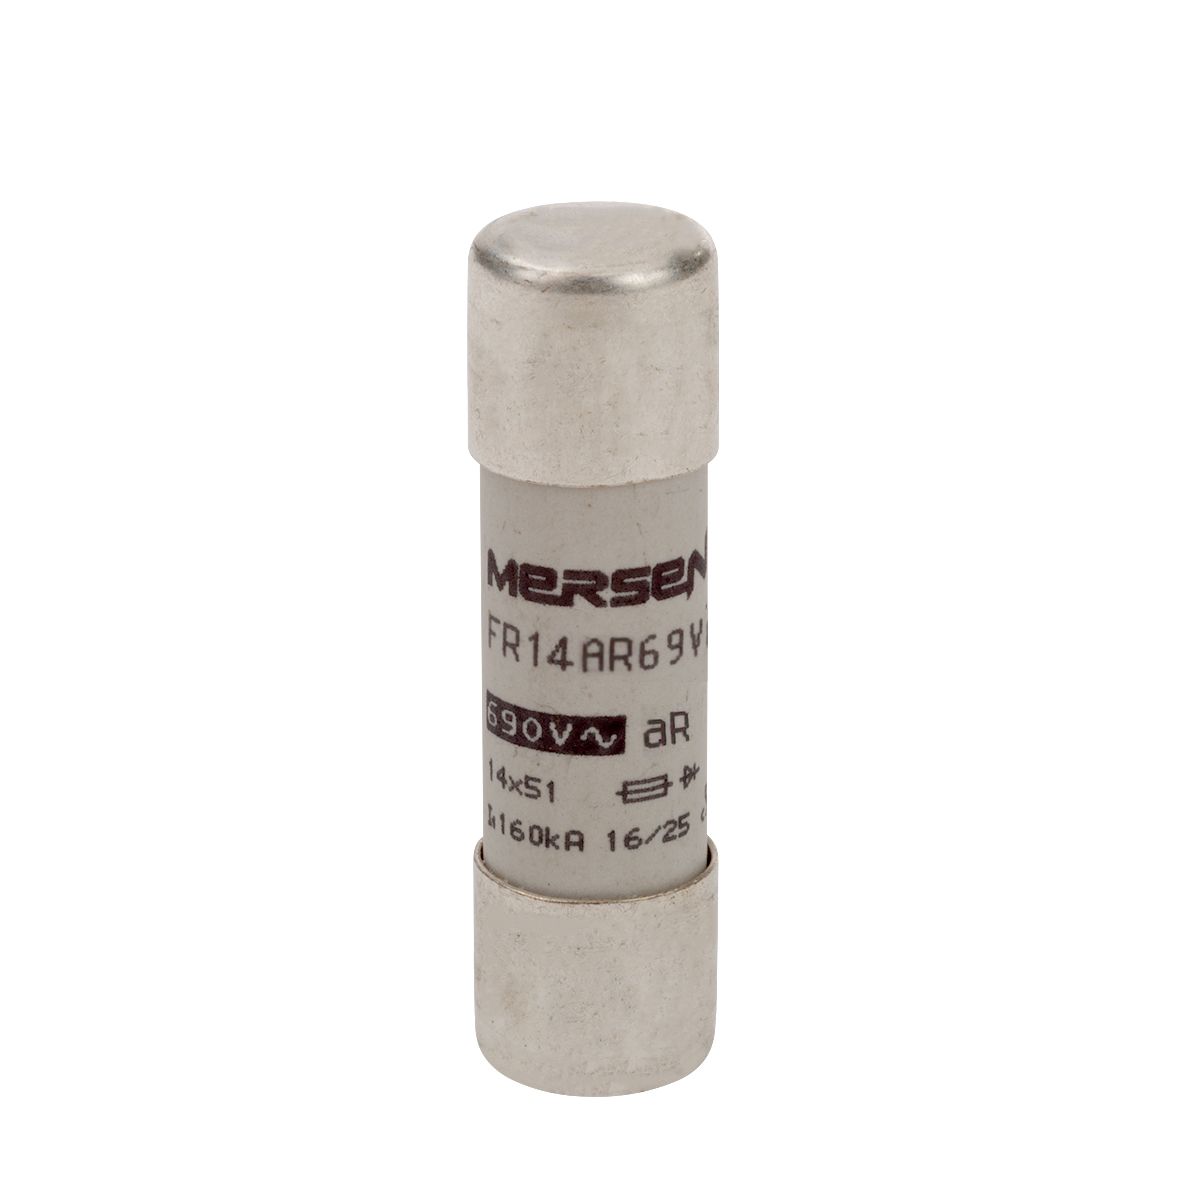 M1027329 - Cylindrical fuse-link aR 690VAC 14x51, 16A, without indicator